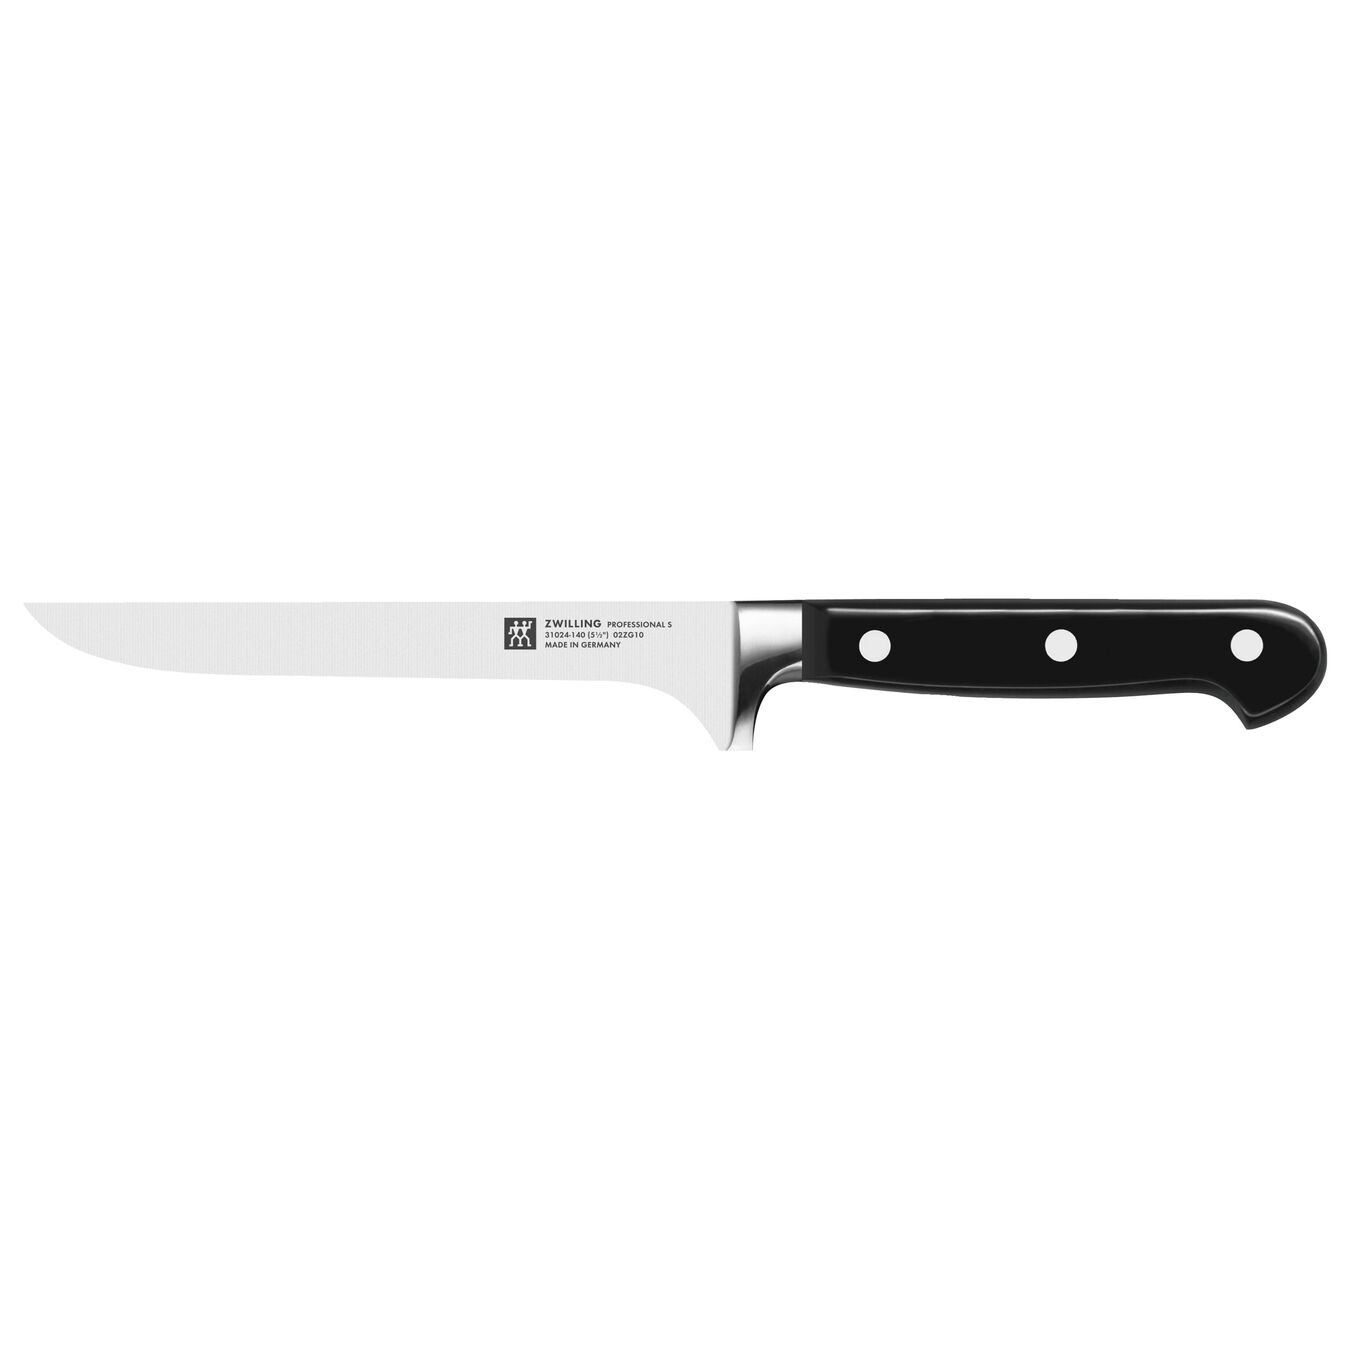 5.5-inch, Boning knife - Visual Imperfections,,large 1